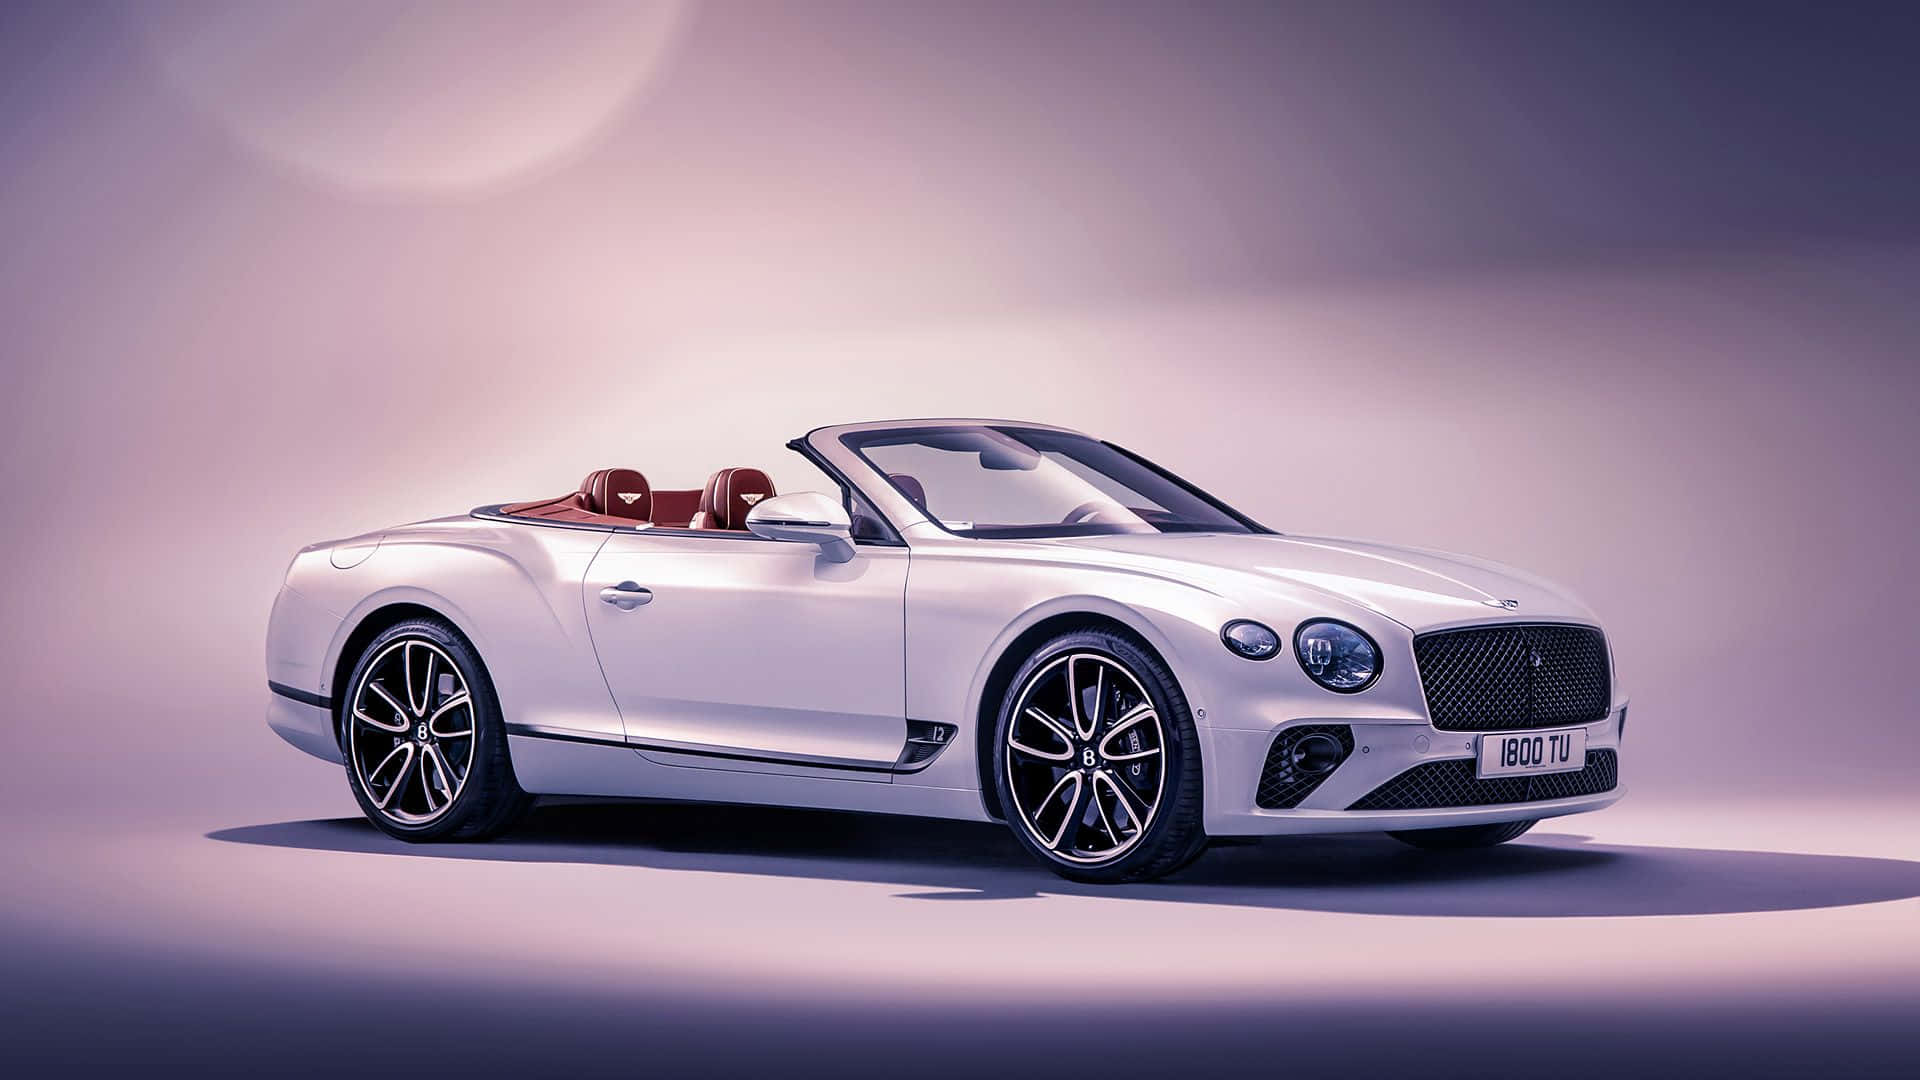 The Finest from Bentley: The Most Desired Luxury Cars